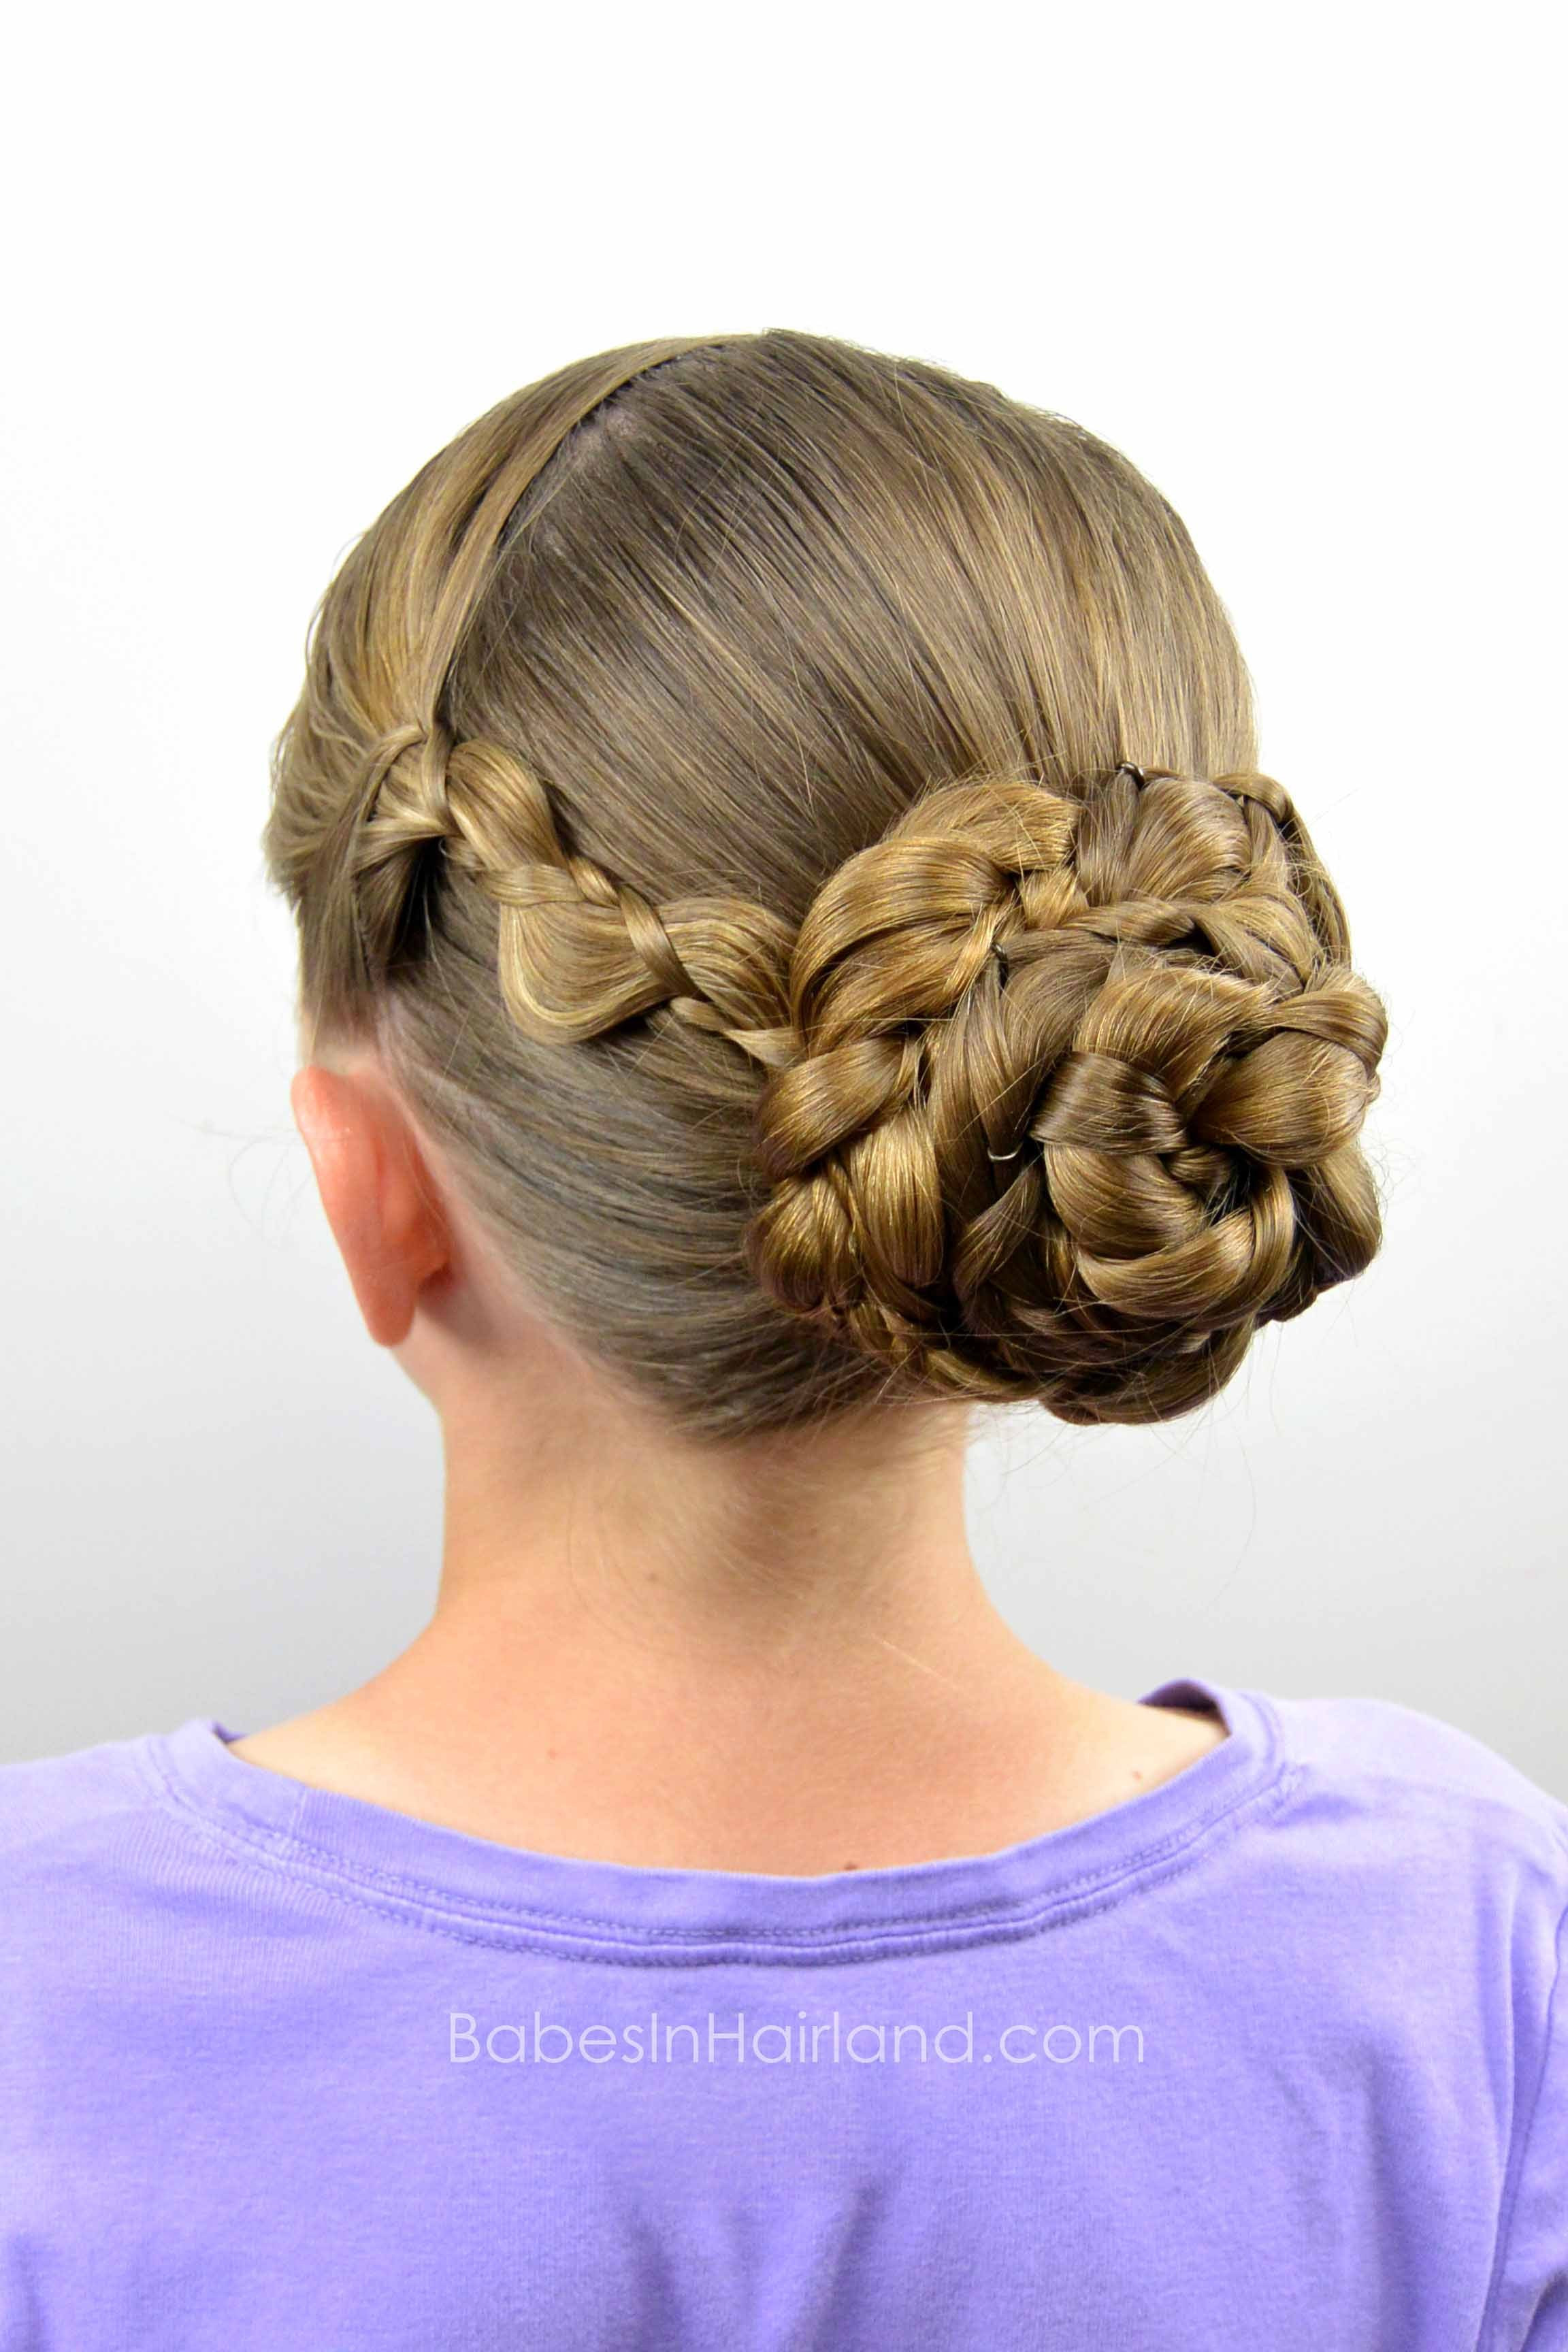 Good Braid Hairstyles
 Easy Braided Hairstyle for Summer Babes In Hairland